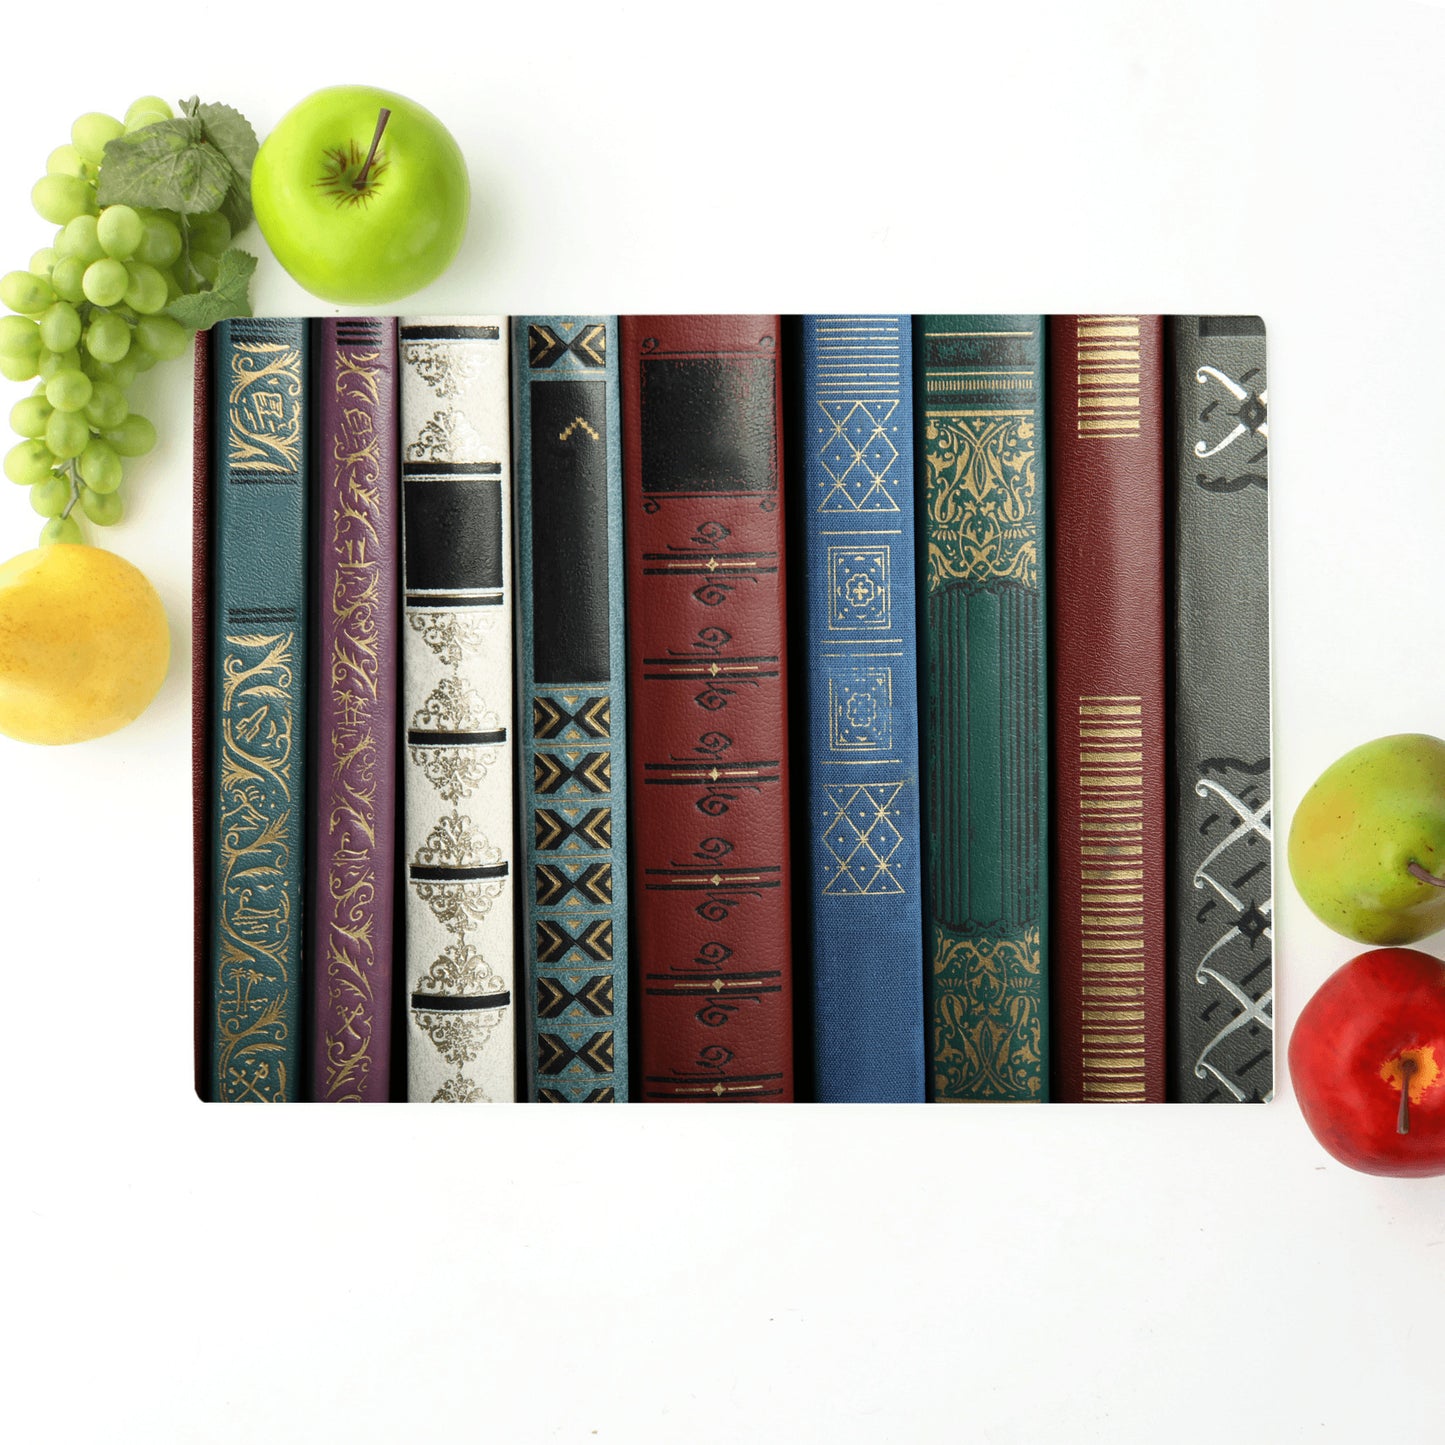 Book image on a glass cutting board for gift